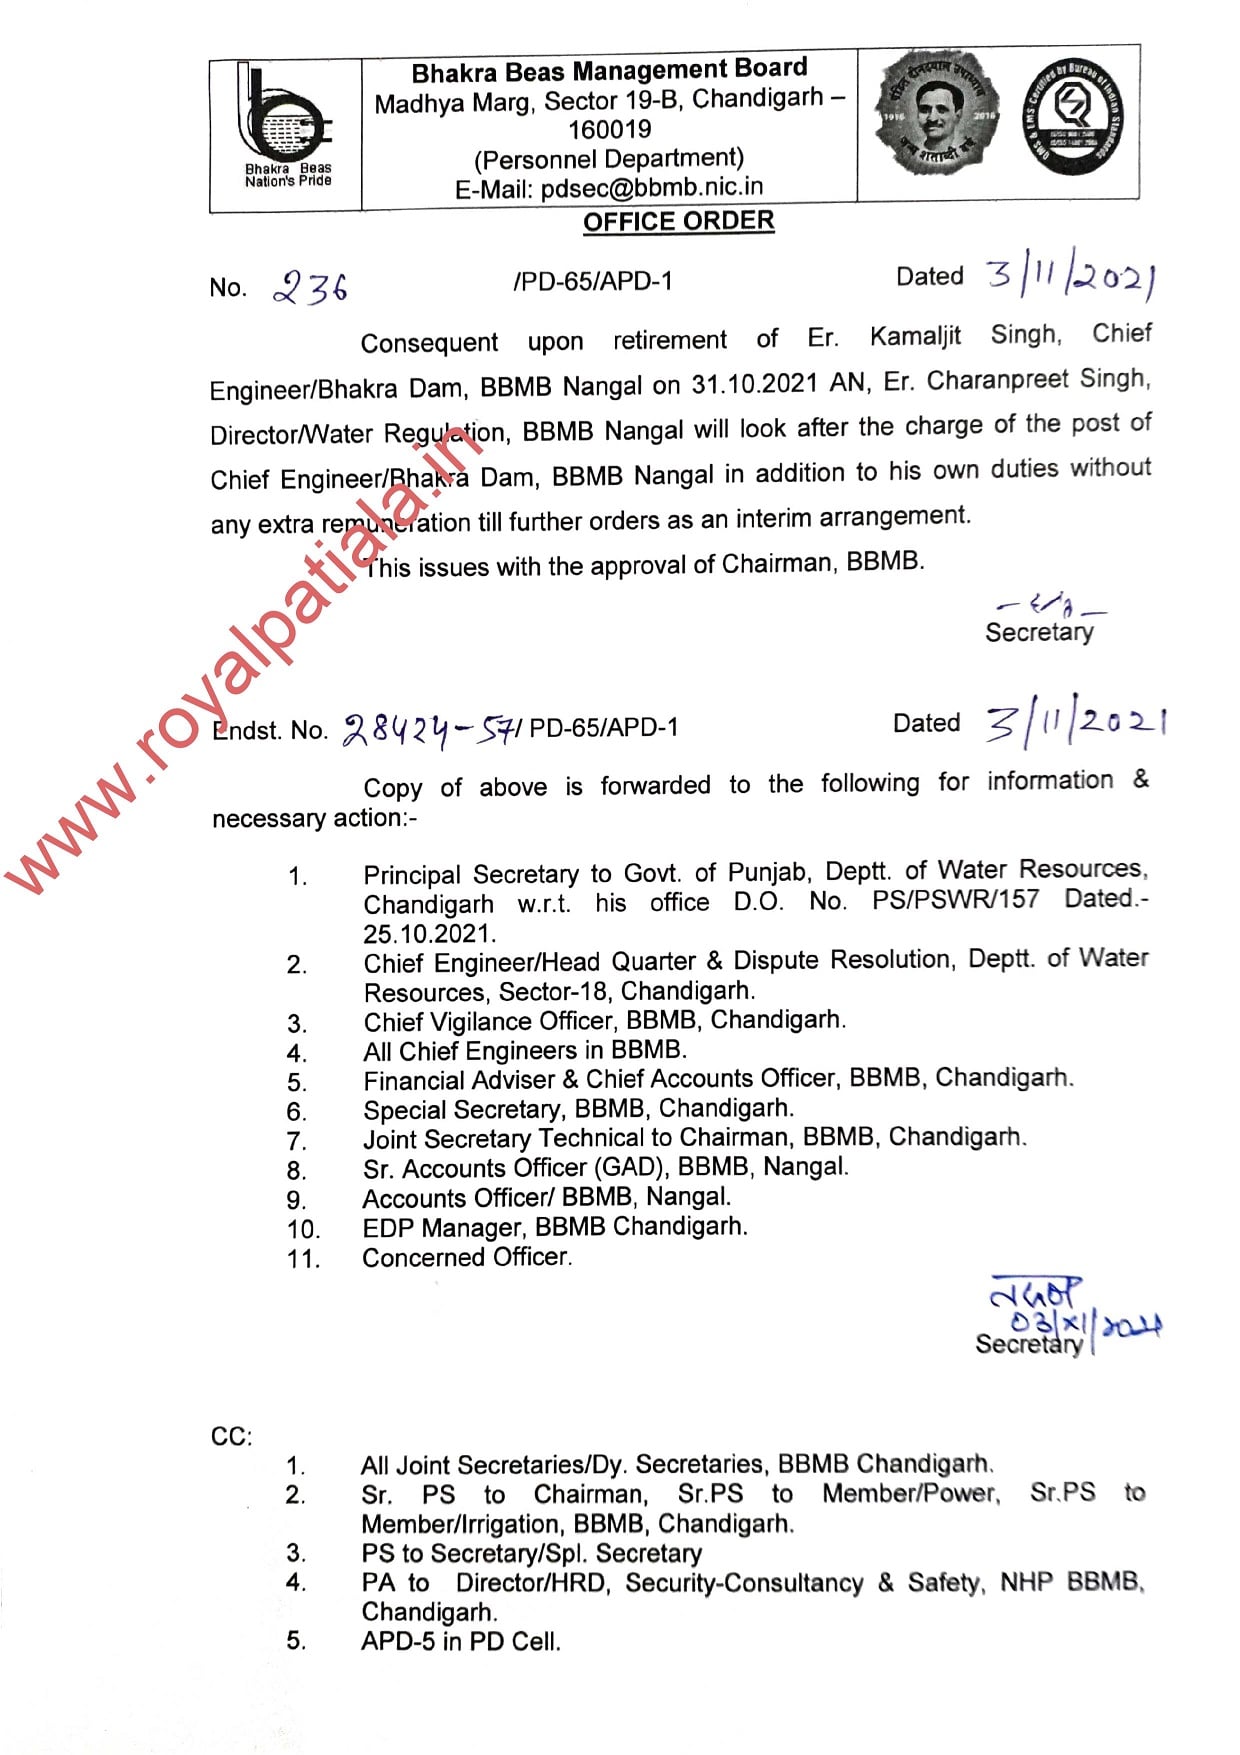 Chairman, Bhakra Beas Management Board (BBMB) has issued an office orders giving the additional charge of chief engineer Bhakra Dam, BBMB, Nangal to Er Charanpreet Singh, after the retirement of Er kamaljit Singh. 